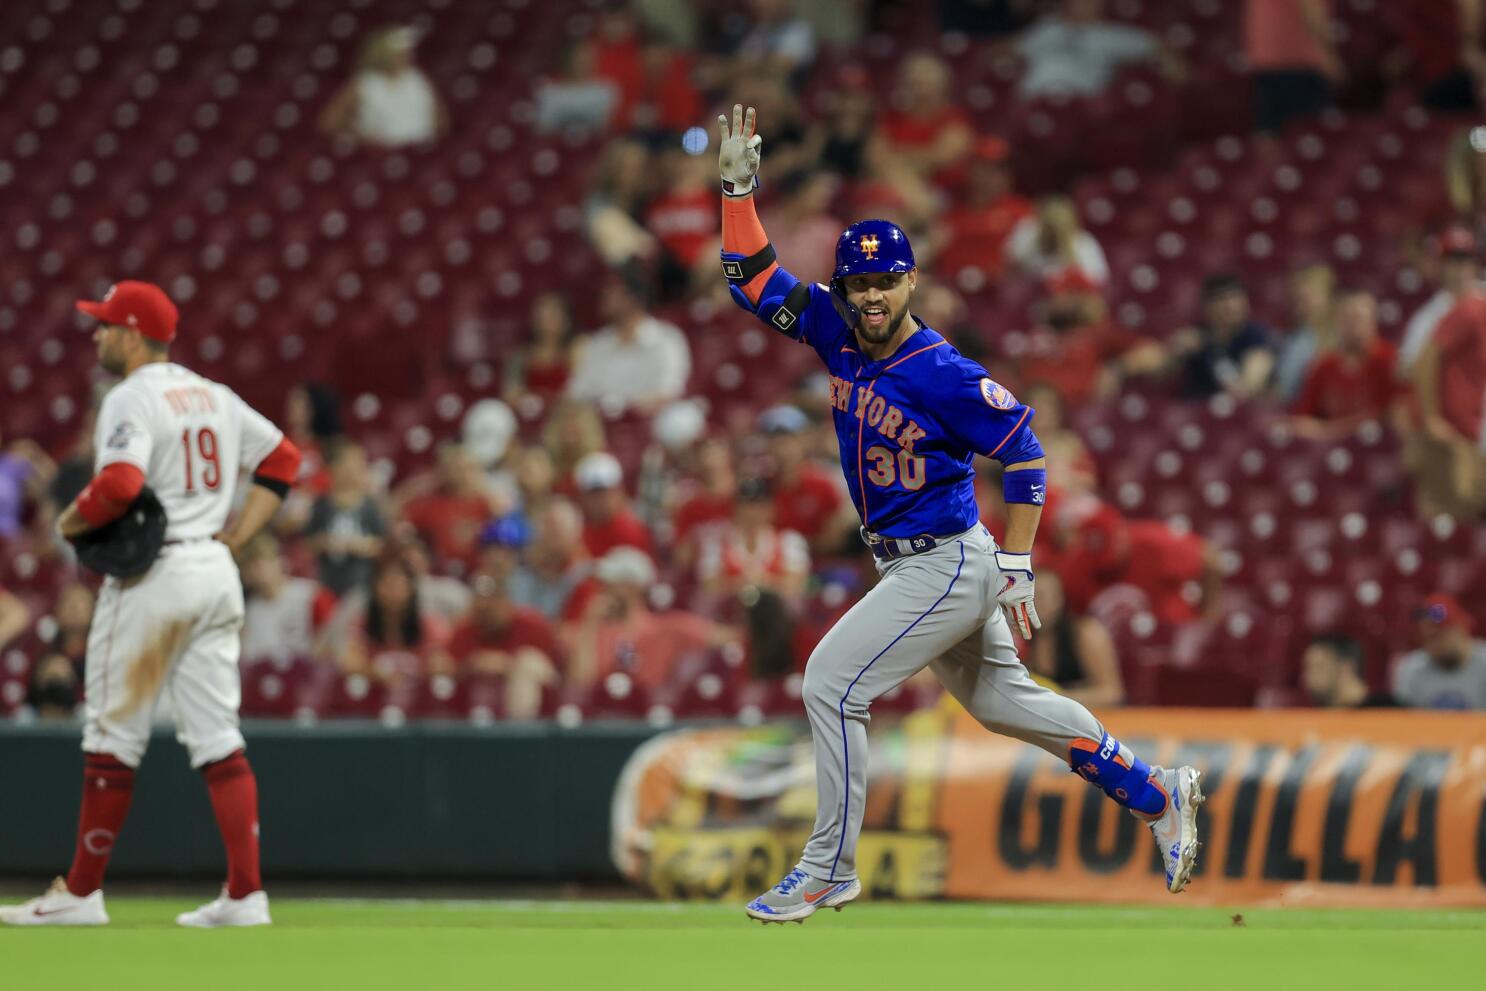 Reds score four runs in first inning to beat Mets